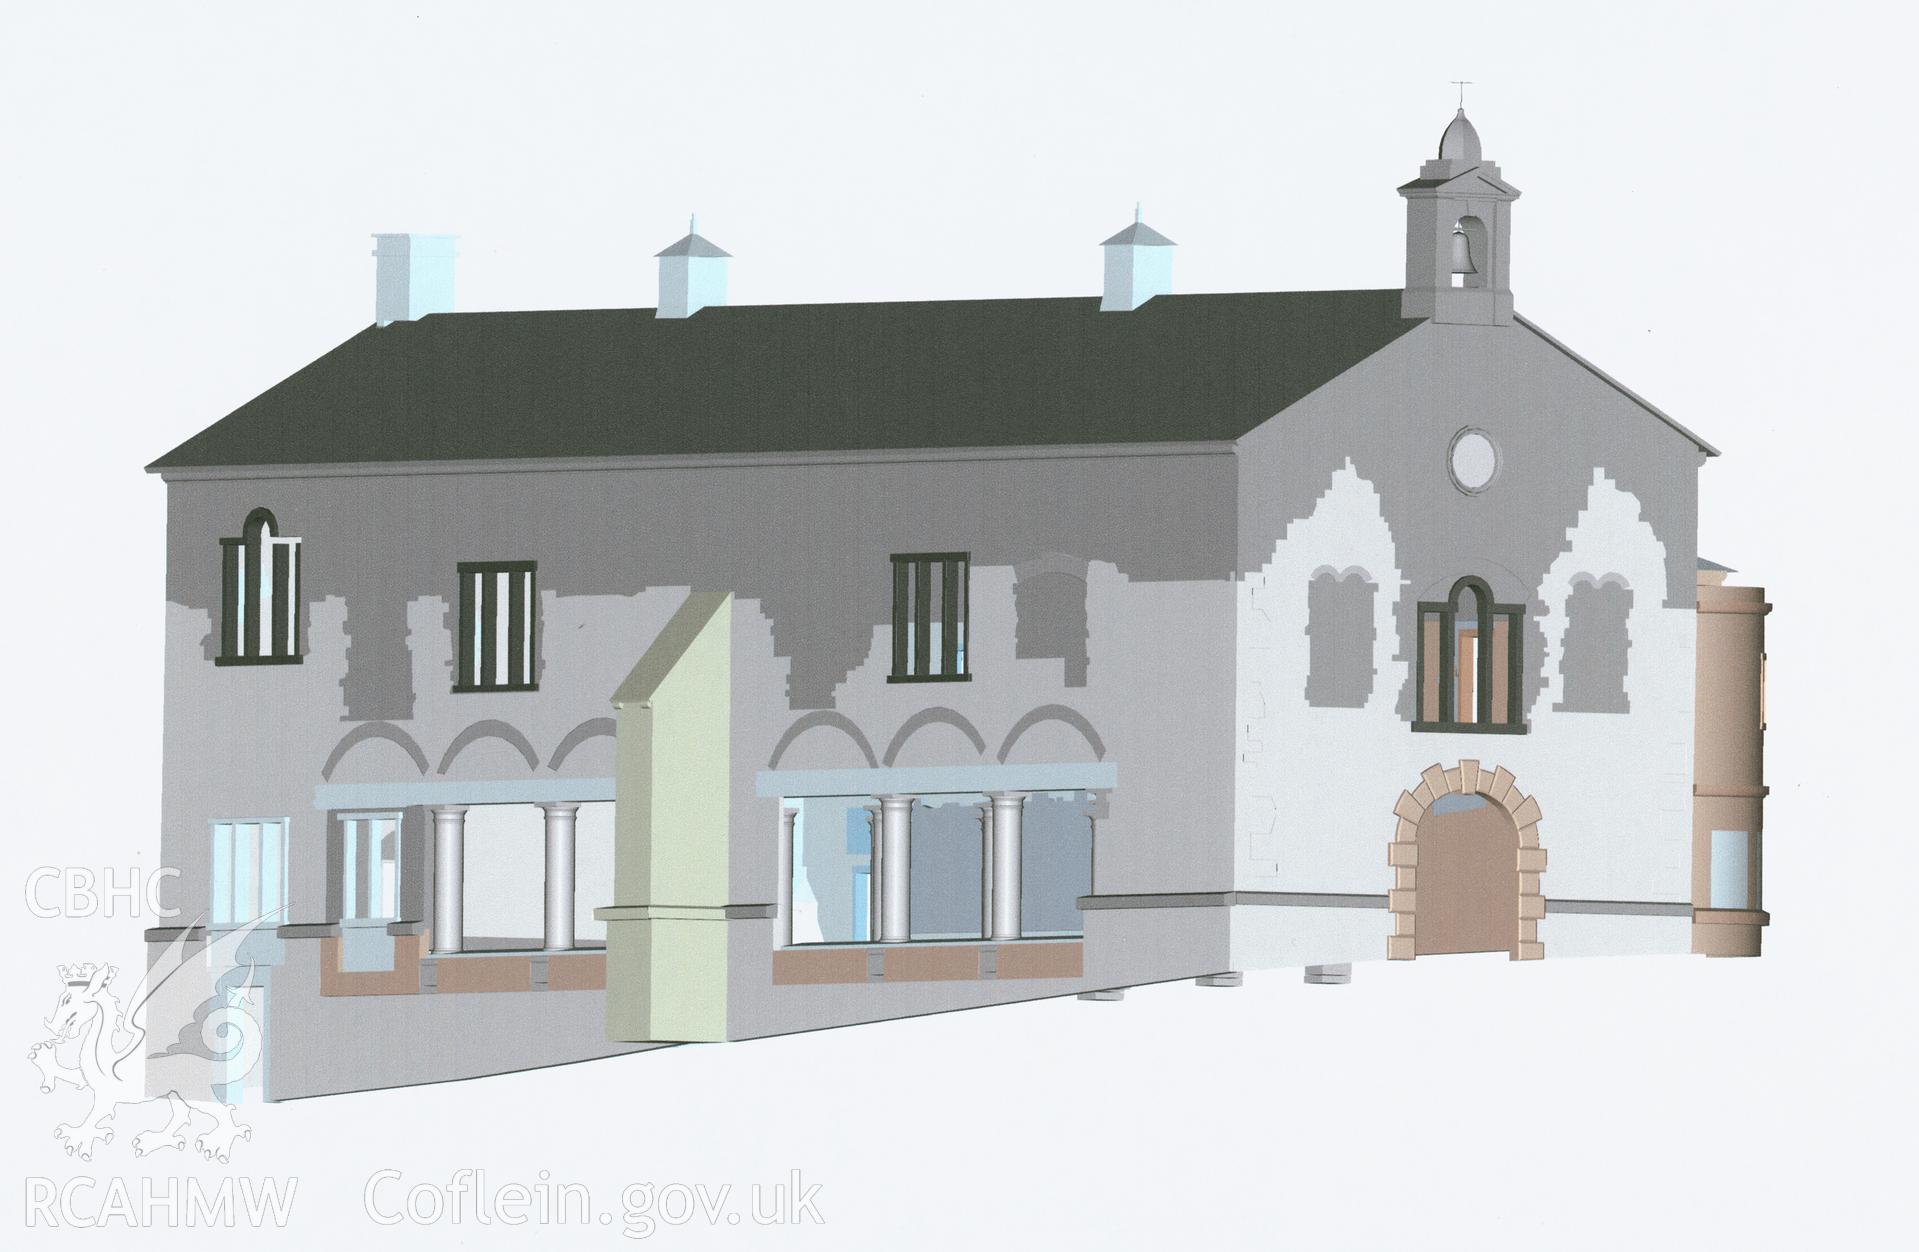 Printout of autocad phased, 3D solid model, produced from the autocad file DCH12 and showing all surviving phases of constuction in three-quarter view, from a detailed digital building survey of Denbigh Town Hall, carried out by Susan Fielding, 04/08/2005 to 21/09/2005, as part of the Denbigh Town Heritage Initiative.